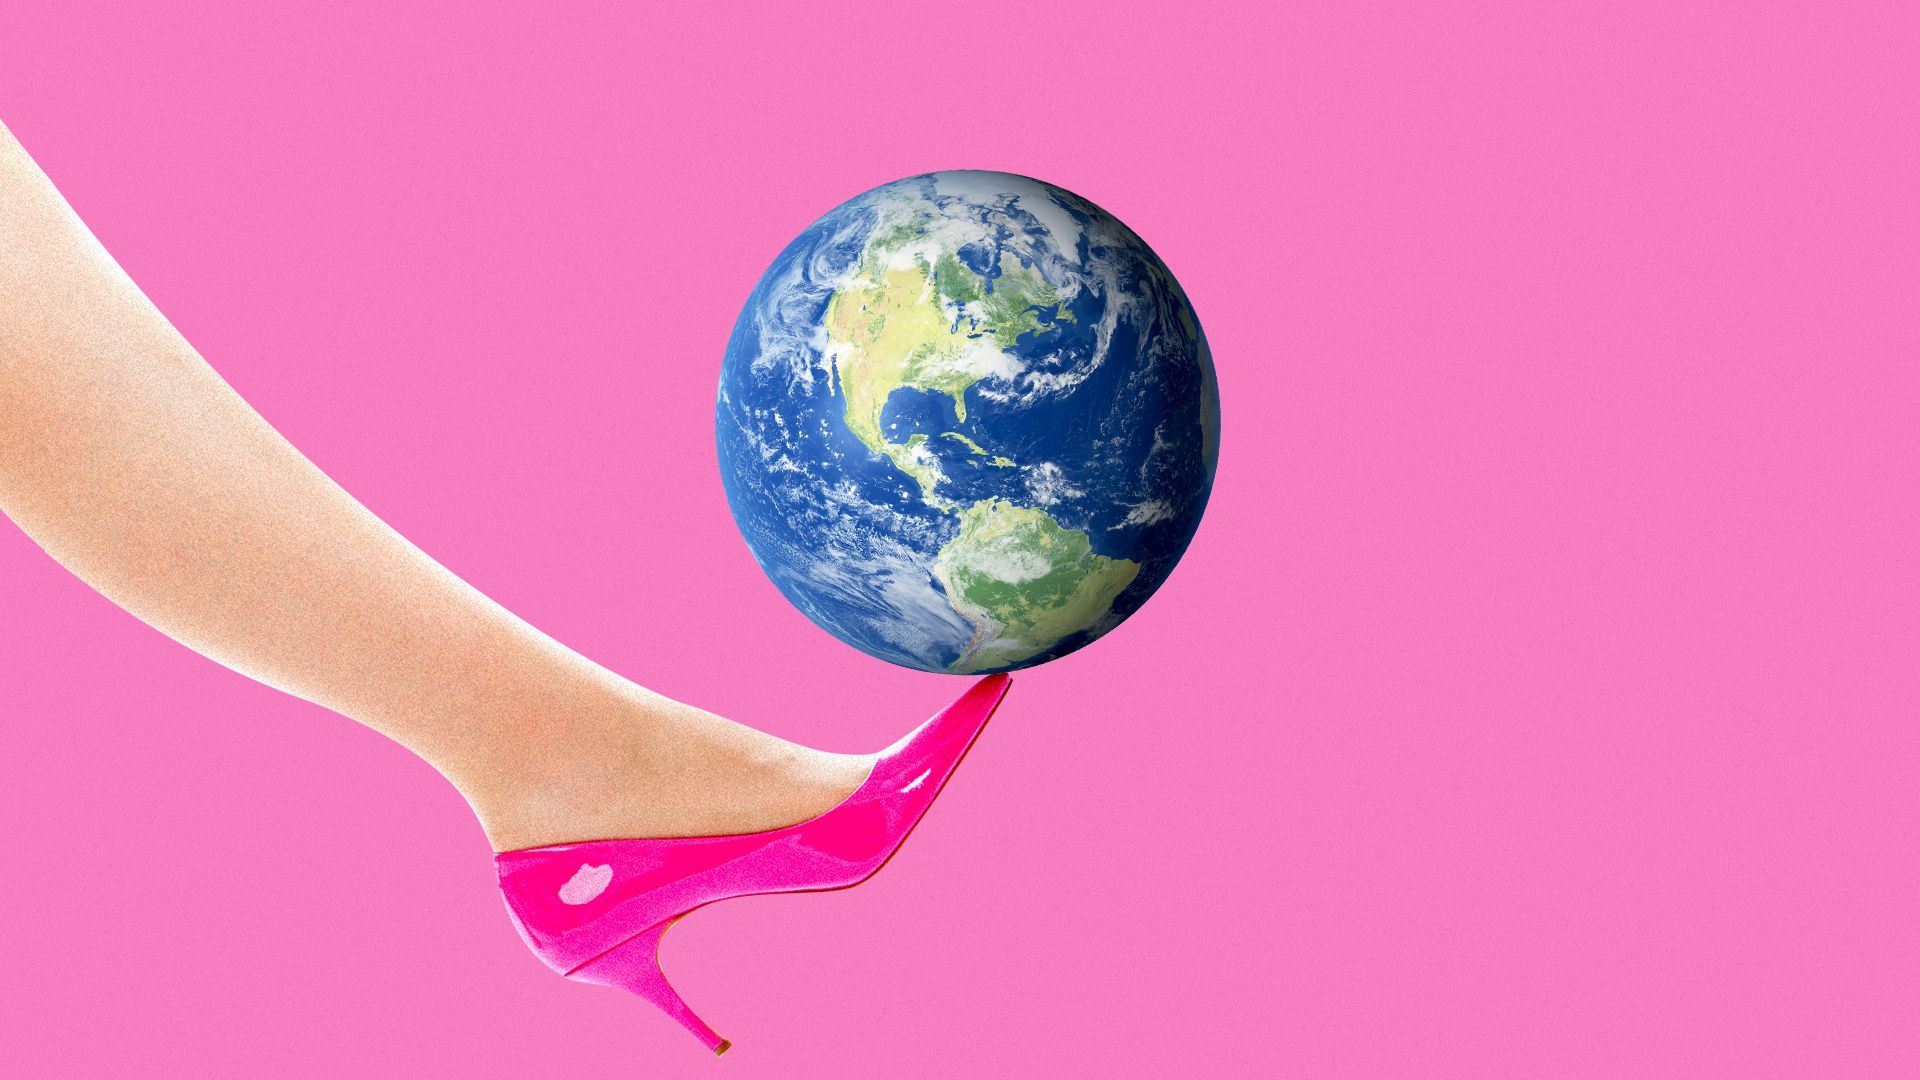 Illustration of a pink high heeled leg balancing the Earth on her toe